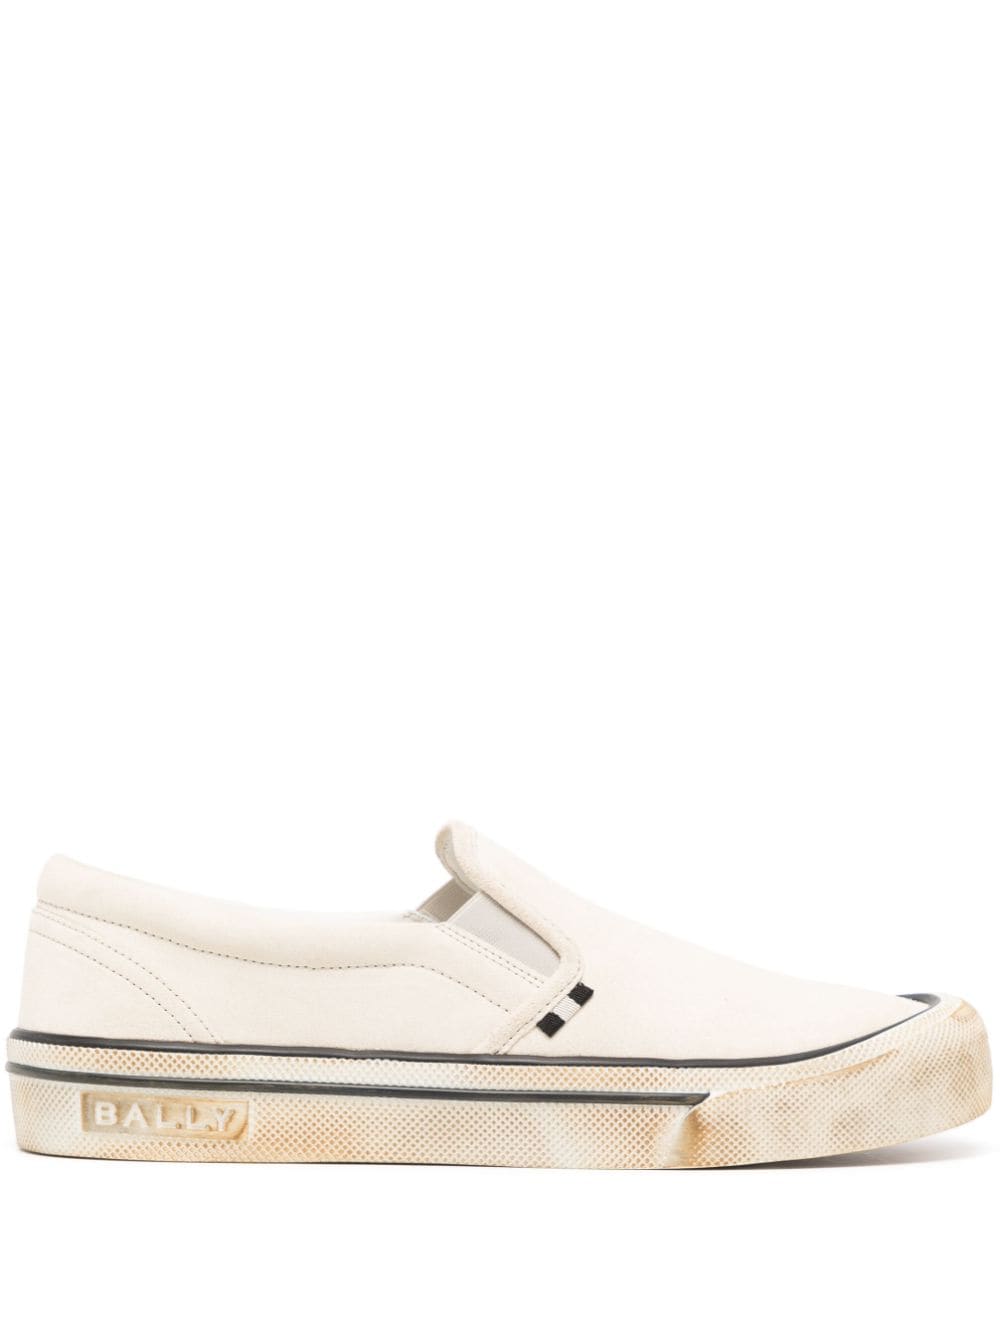 Bally slip-on low-top suede sneakers - White von Bally